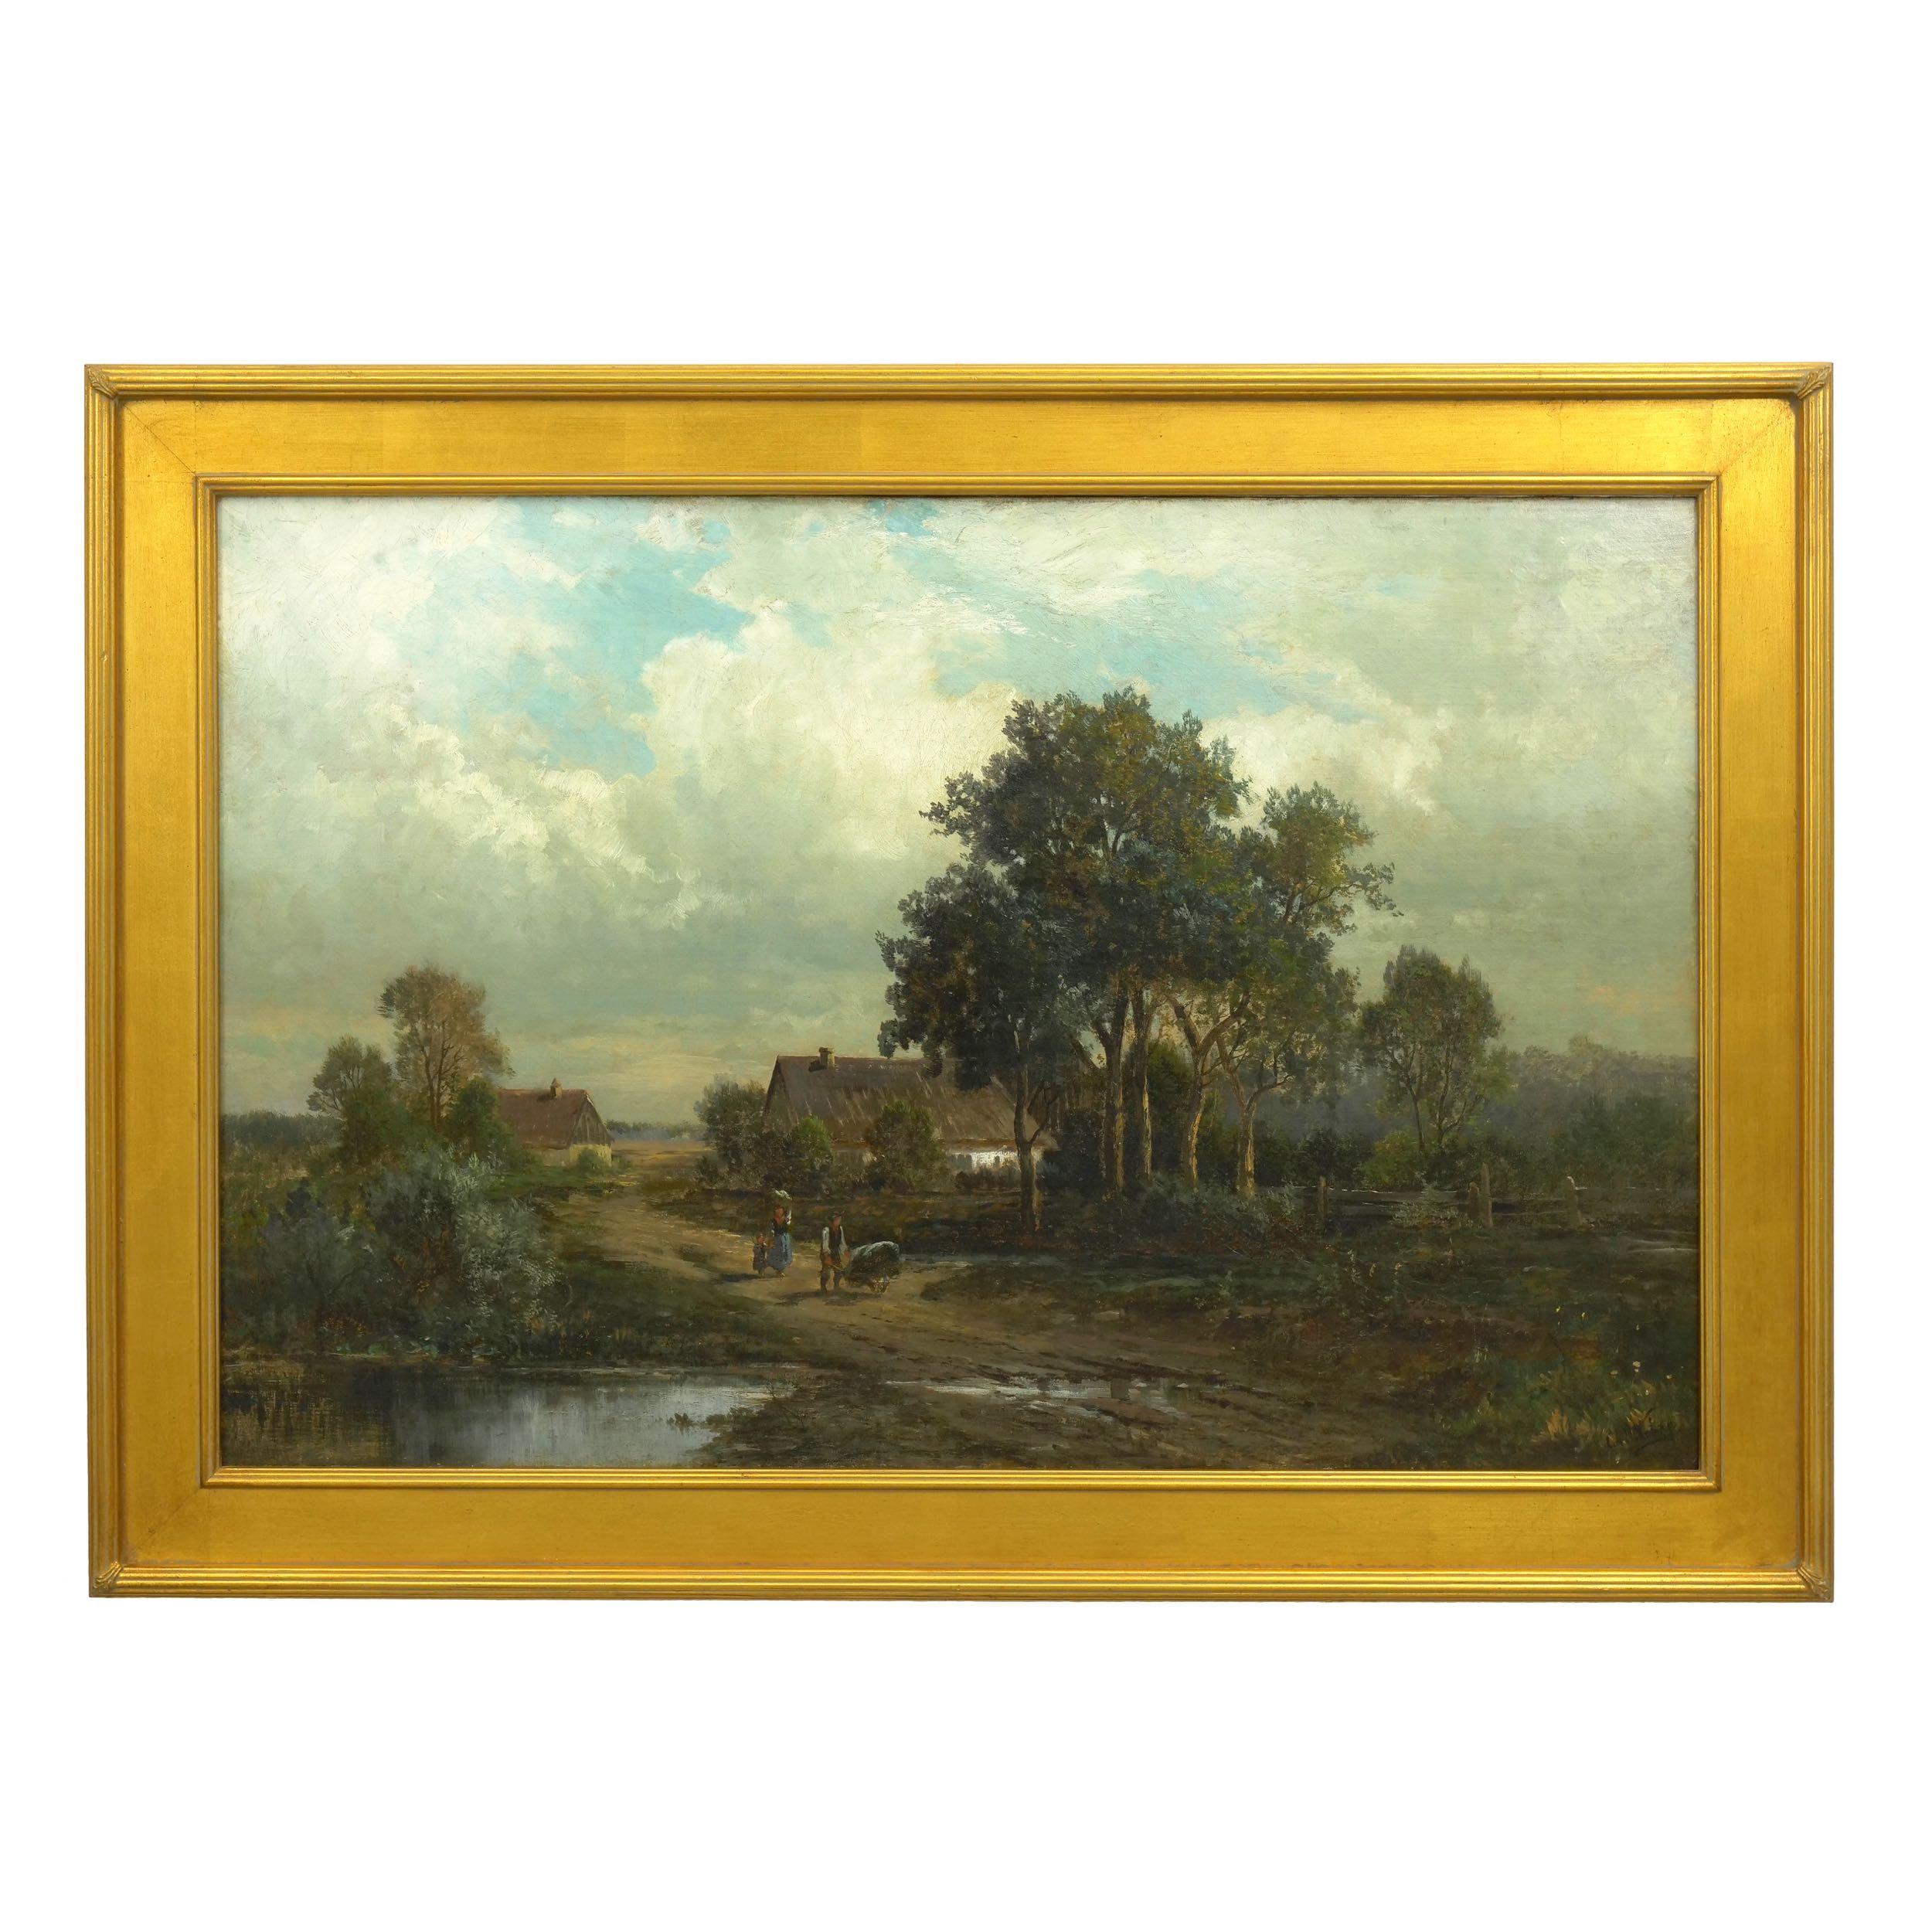 A moving landscape that captures a glimpse of the countryside of Bamberg, Germany during the late 19th century, there is a gentle story of peasant life told in the figures strolling down the rugged muddy path. Presumably taking their goods to town,